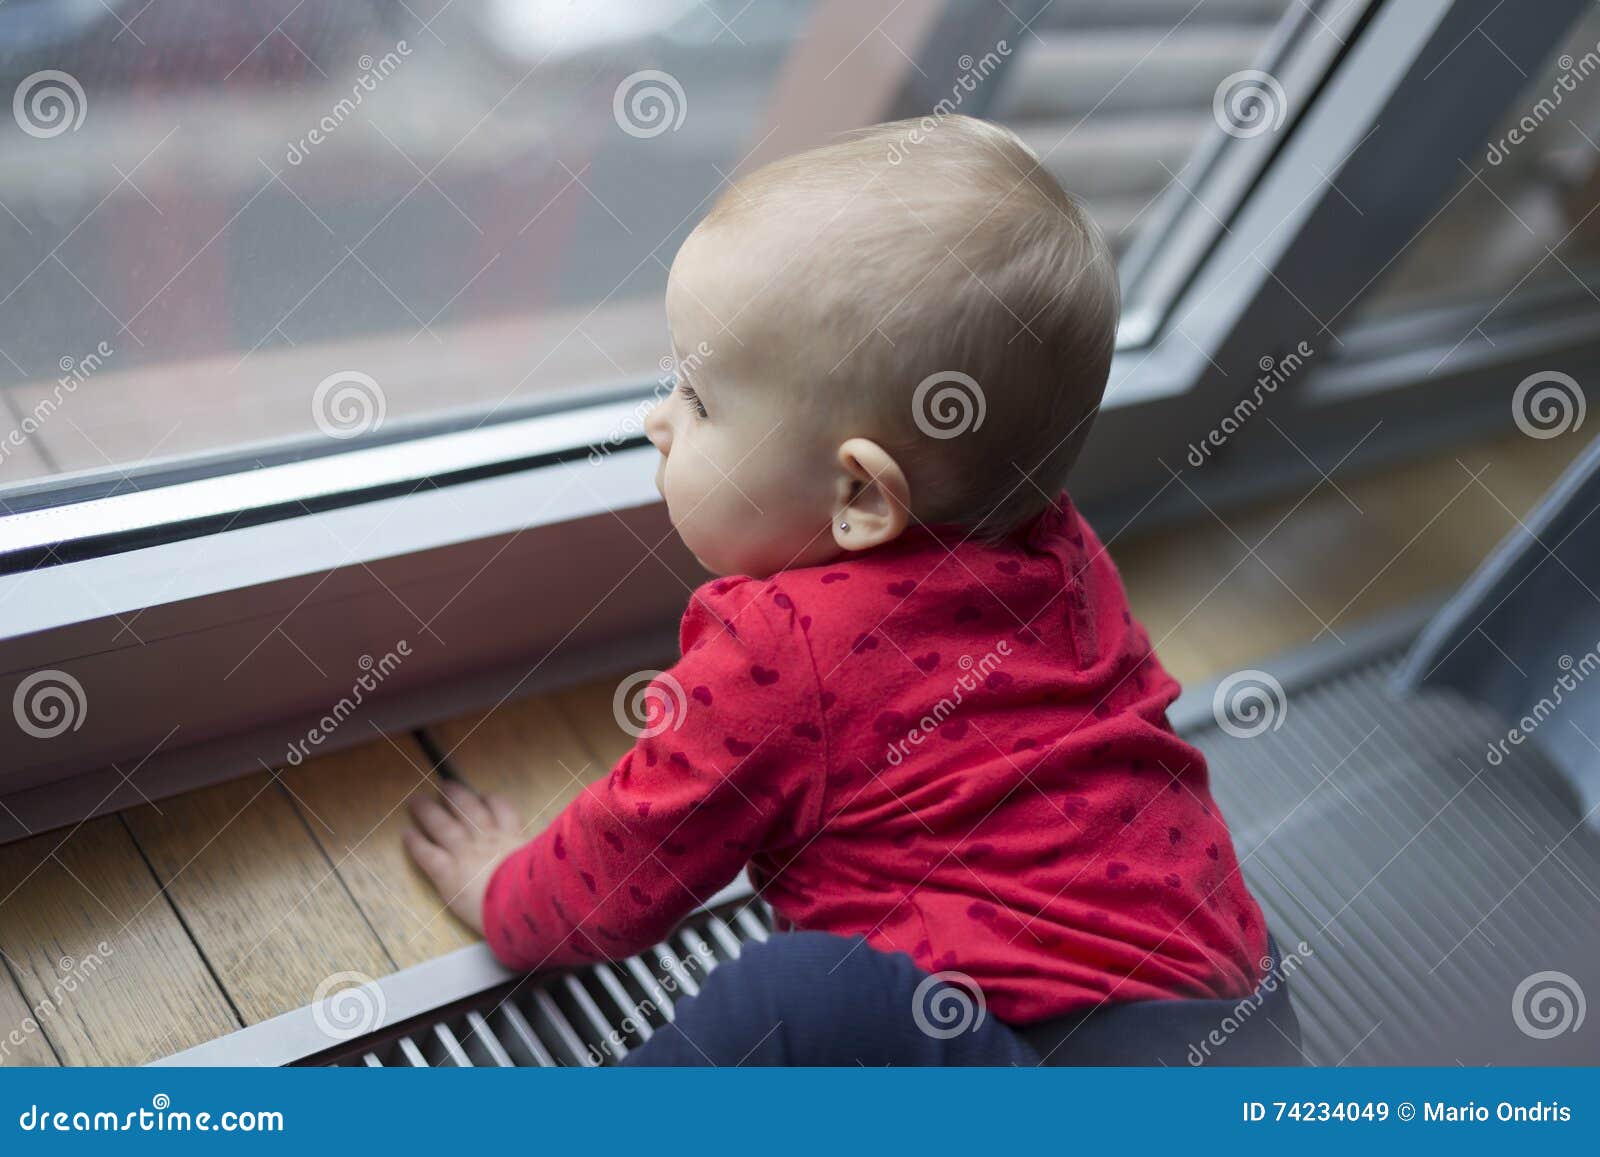 Sad lonely child stock image. Image of pensive, goodbyes - 74234049